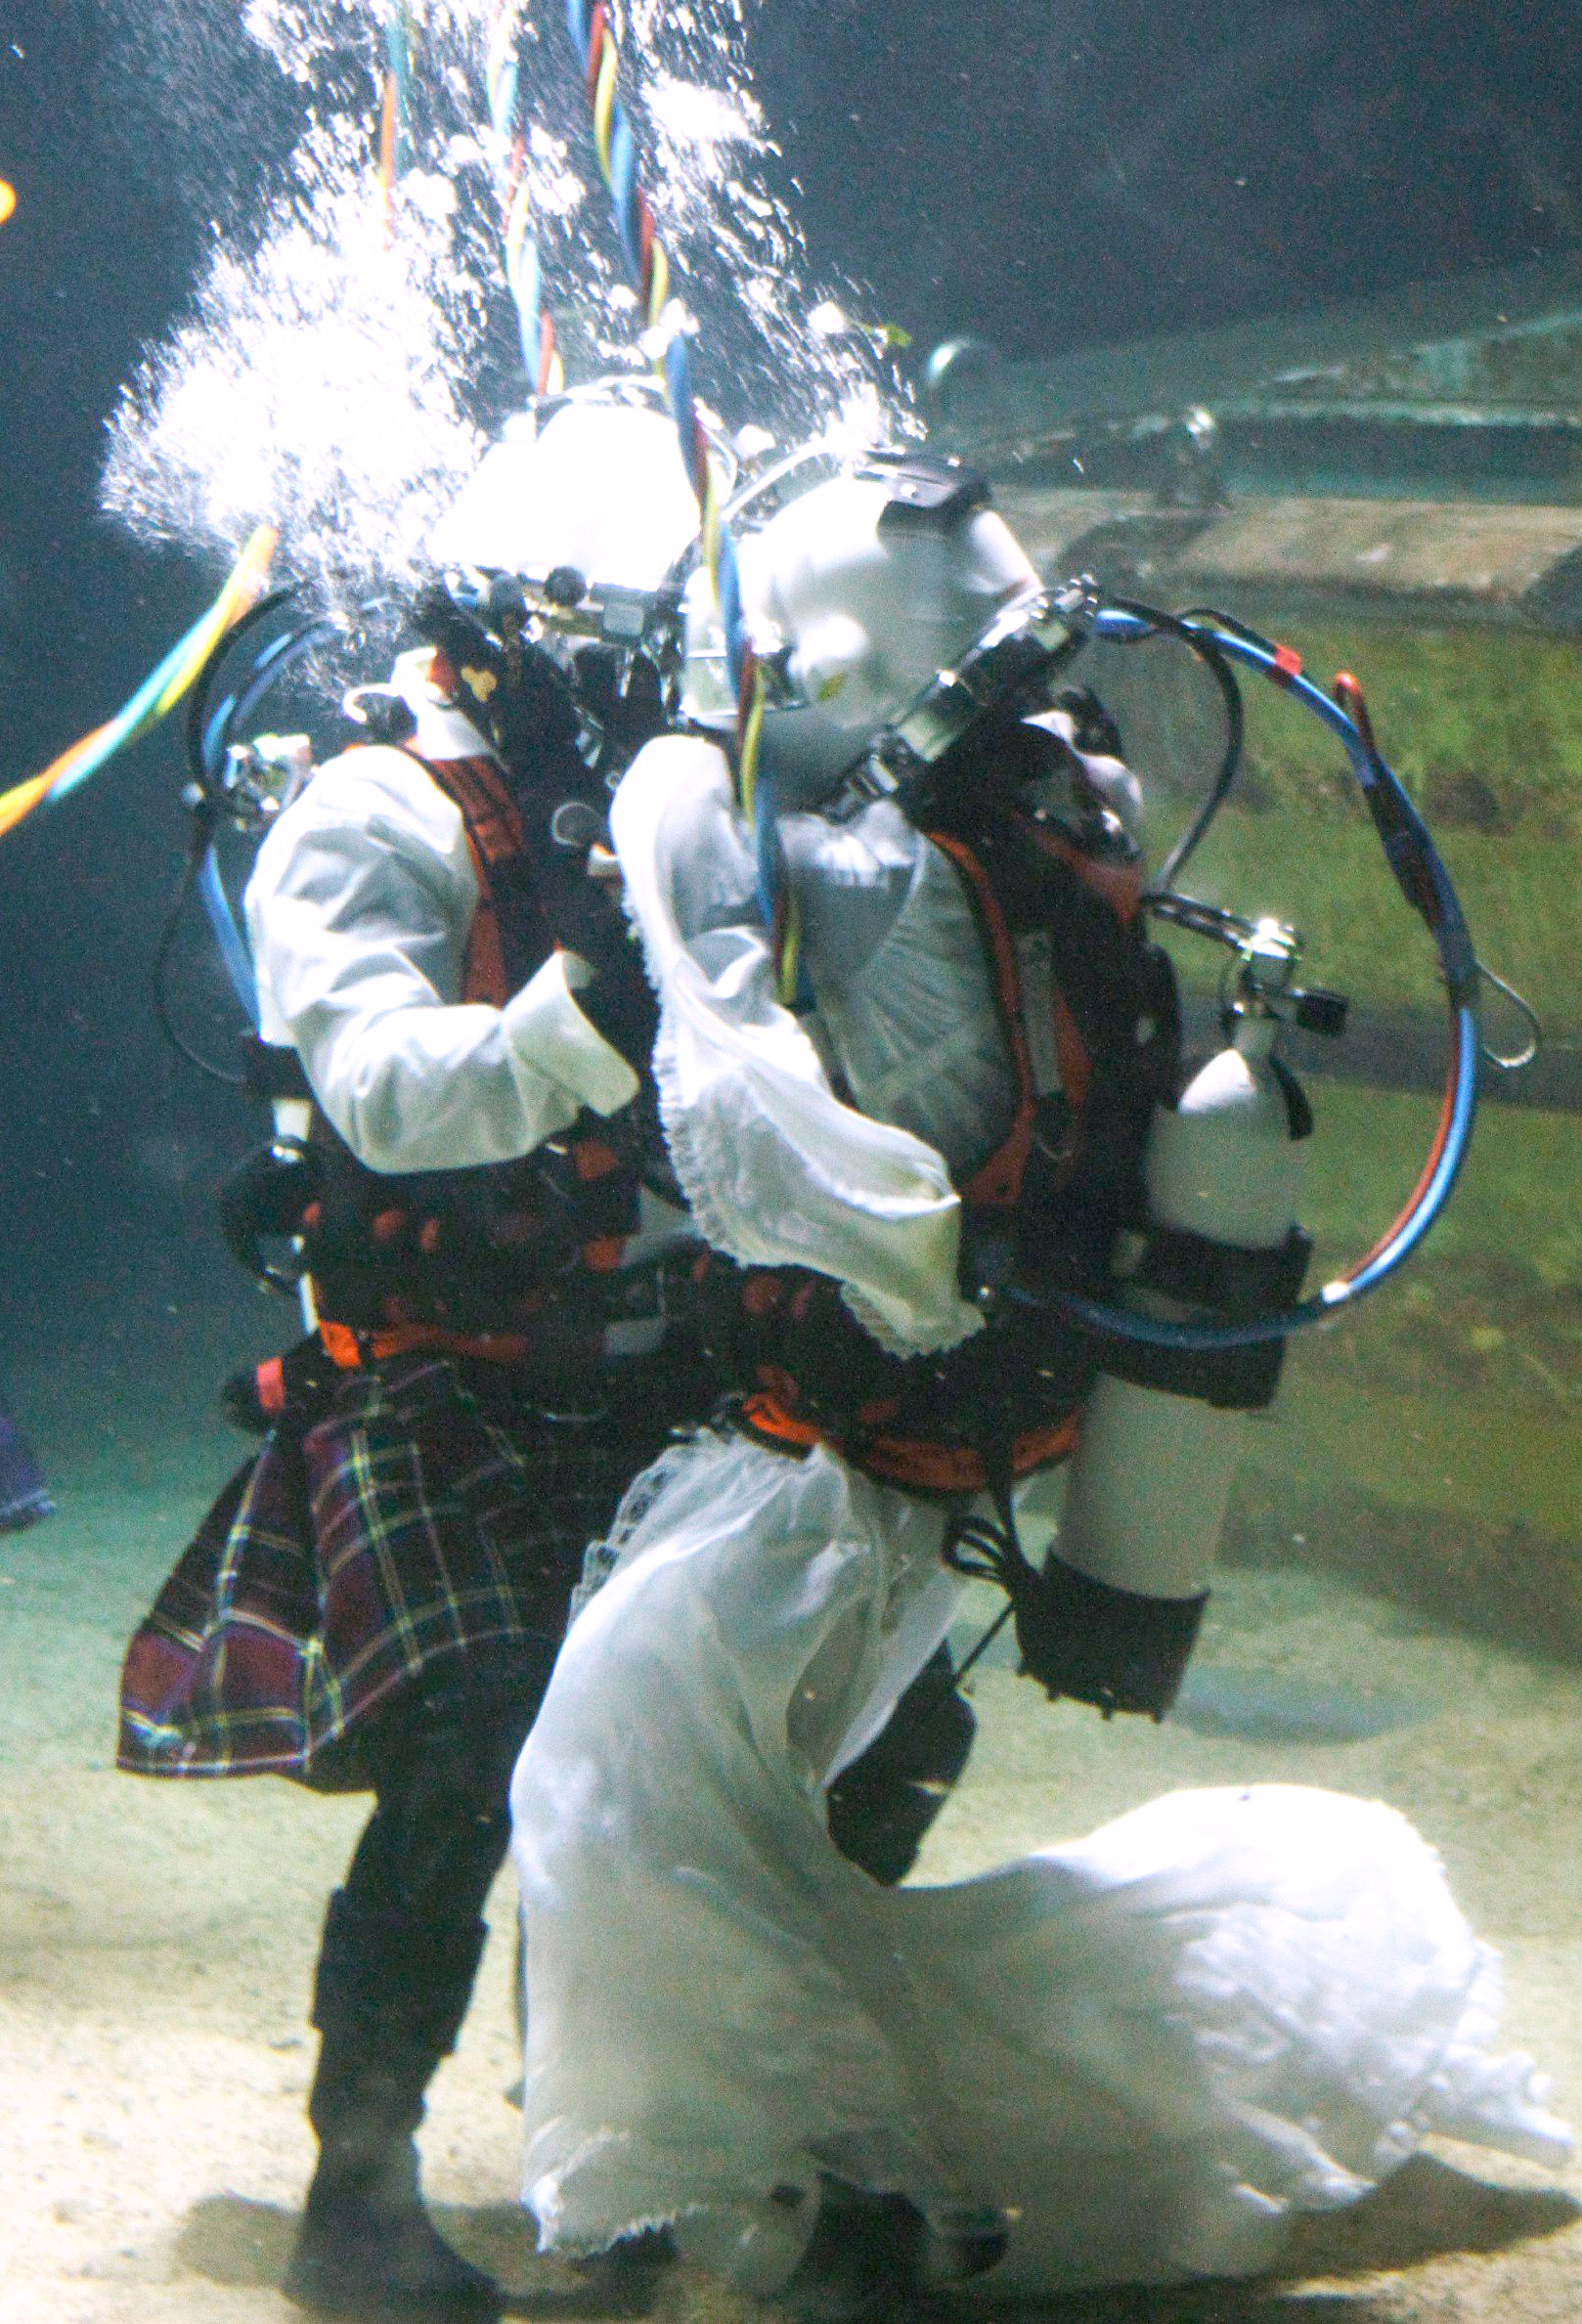 PHOTO: Dorota Bankowska and new husband James Abbott renew their vows underwater inside a diving tank at Fort William Underwater Center in Scotland, Nov. 22, 2014.